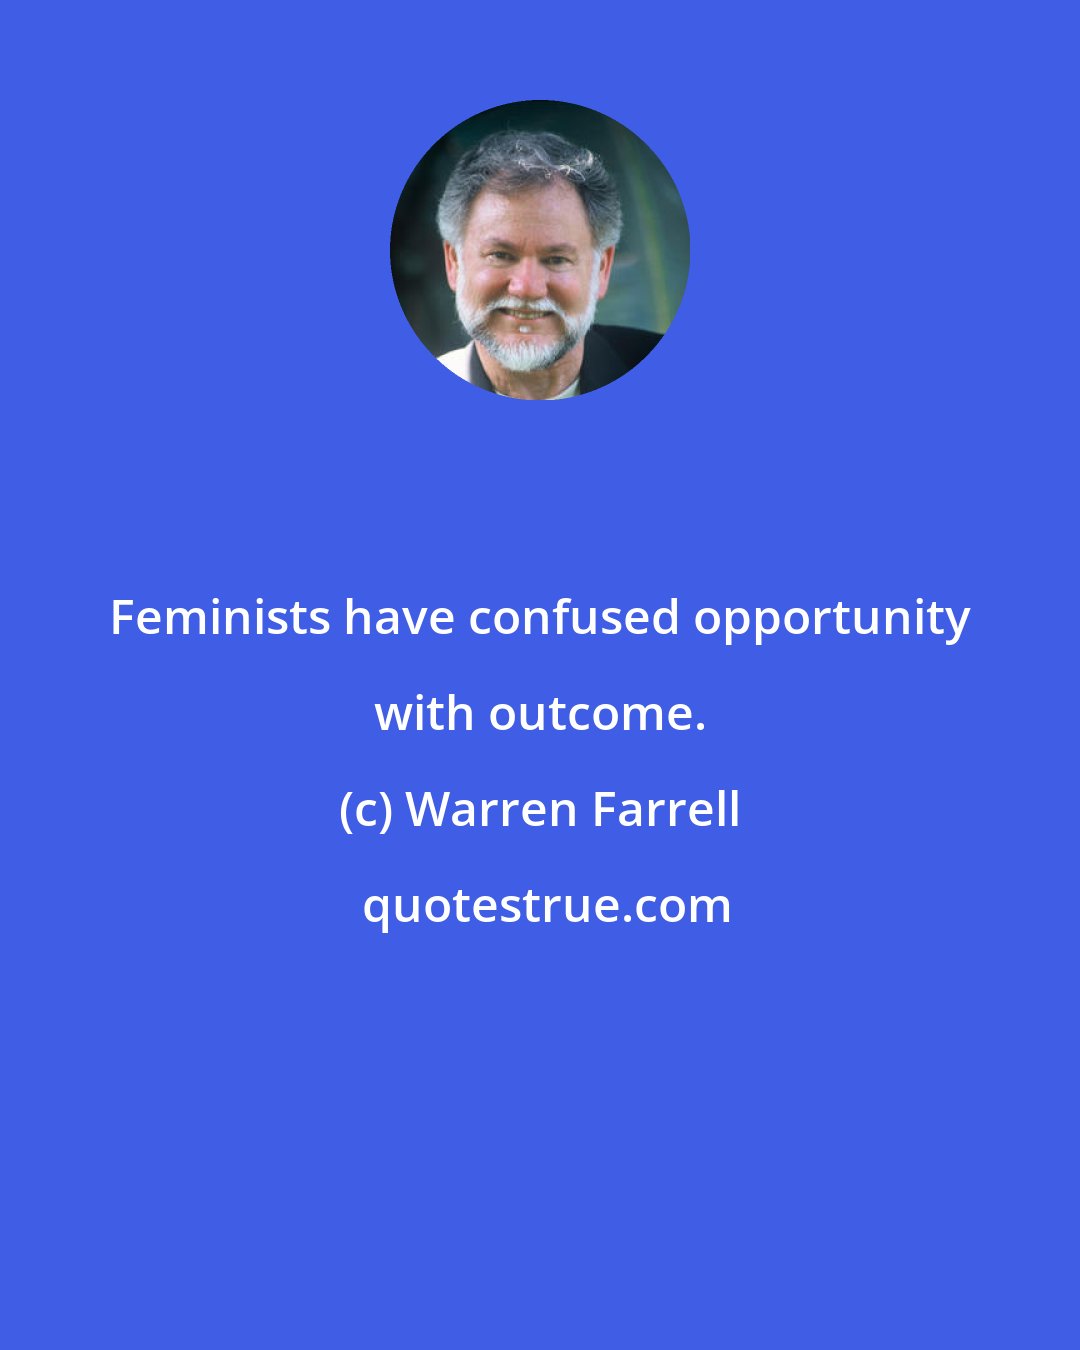 Warren Farrell: Feminists have confused opportunity with outcome.